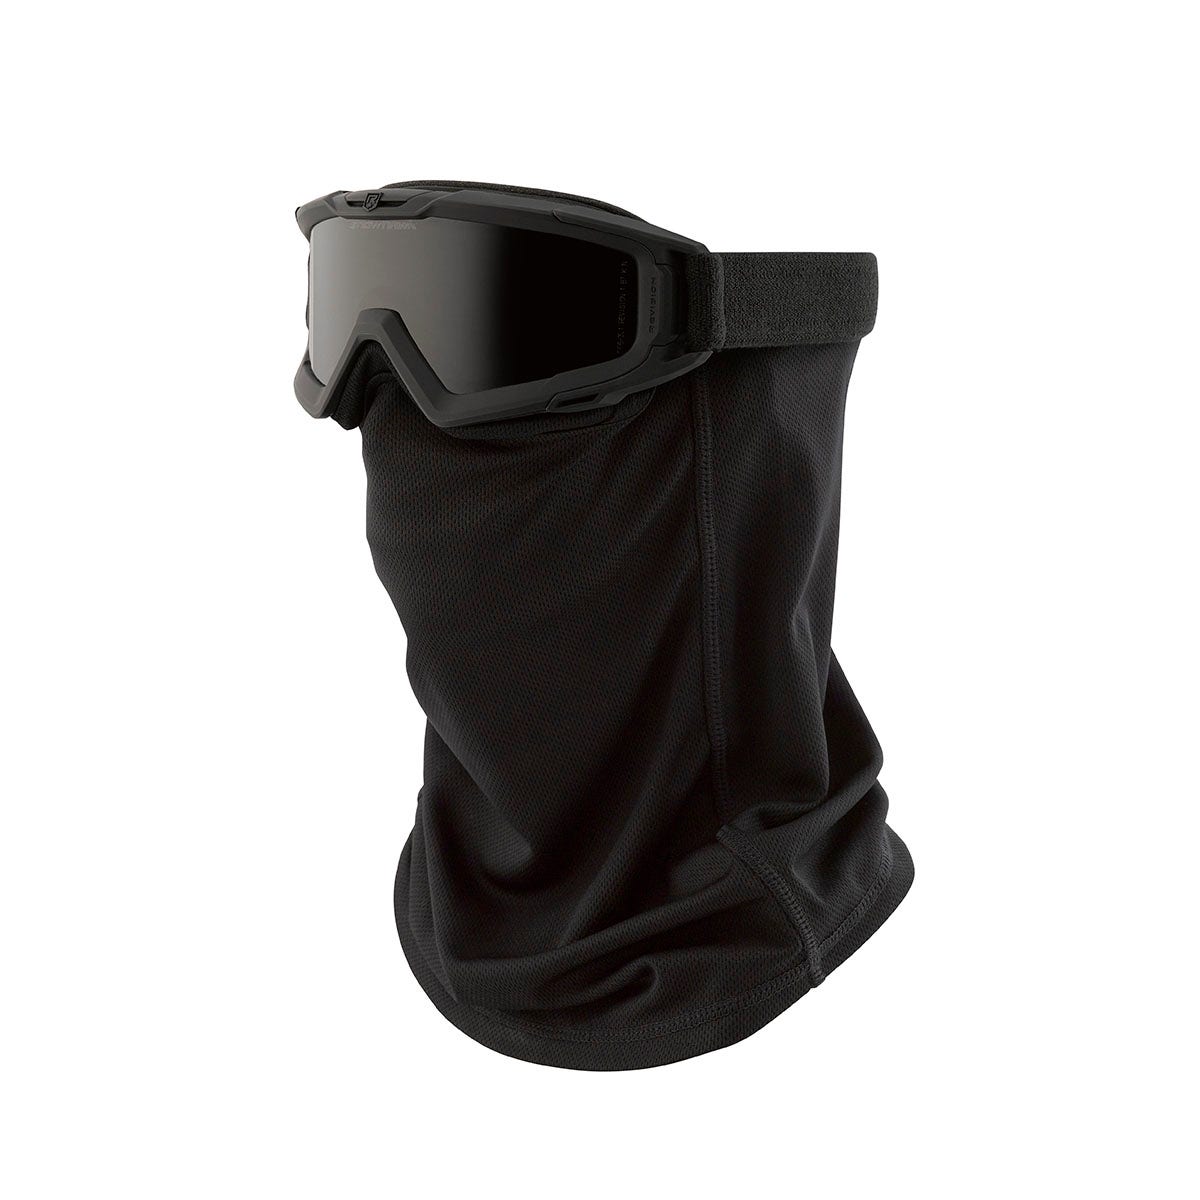 Revision Military GRYPHON FIELD GAITER - Black